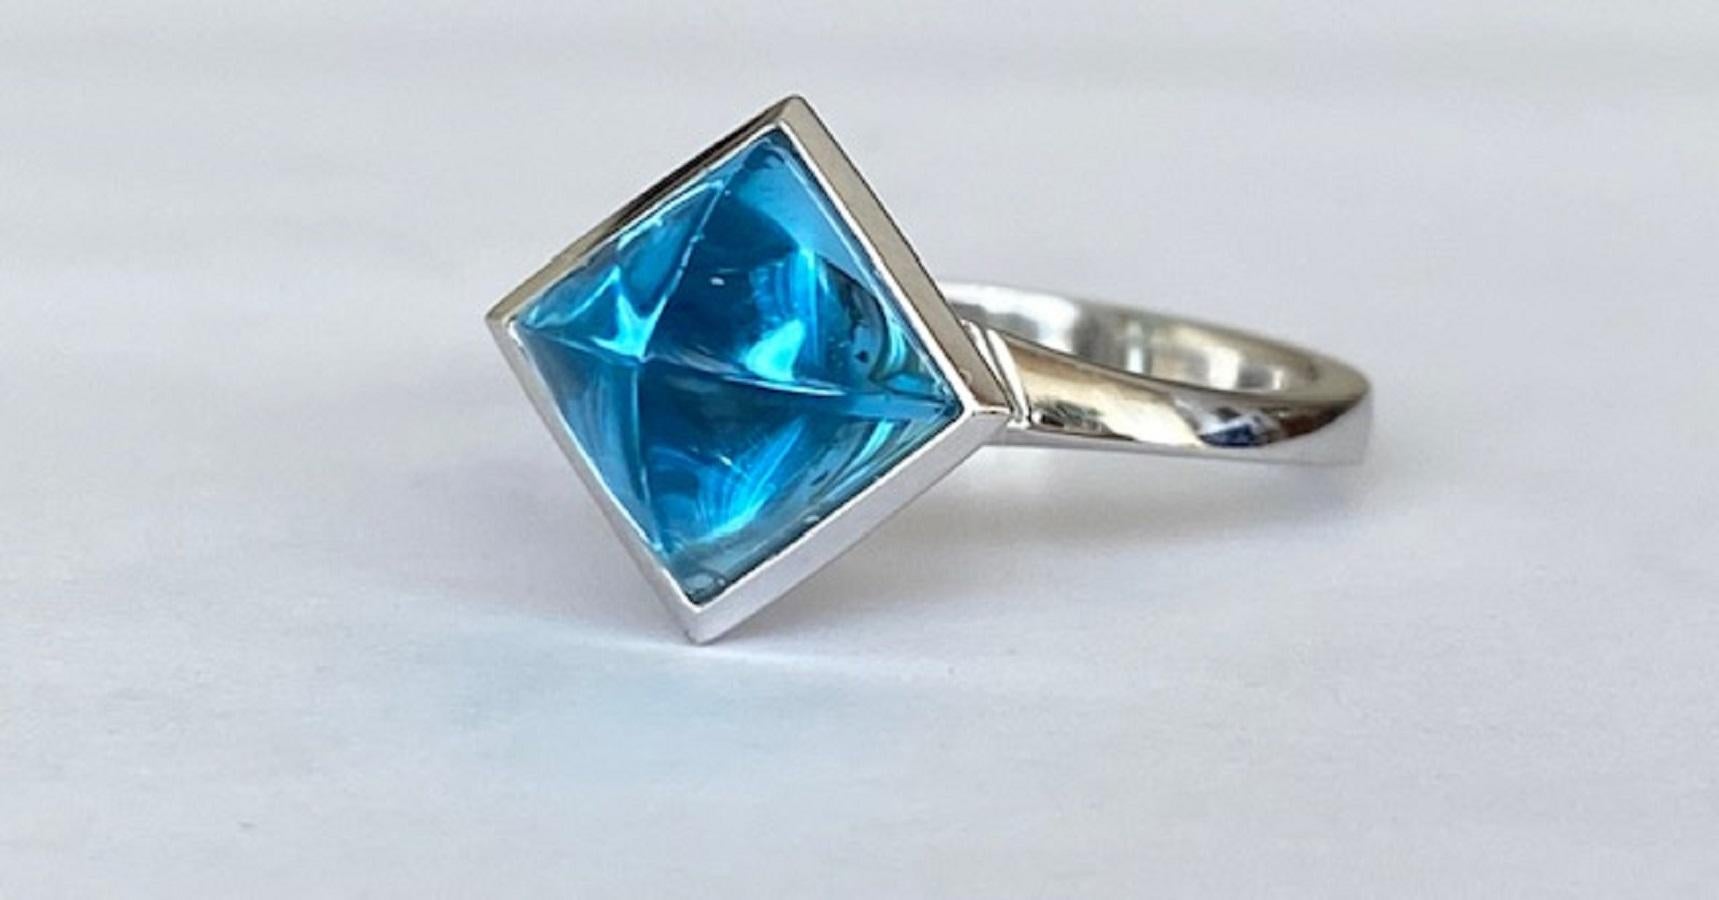 Offered in excellent condition is a designer ring in 18 kt white gold, with a fantasy cabochon cut topaz approx. 3.00 ct, surrounded by an entourage of 39 brilliant cut diamonds. Total diamonds: approx. 0.39 ct G/VS.

Gold grade: 18 KT (marked)
1